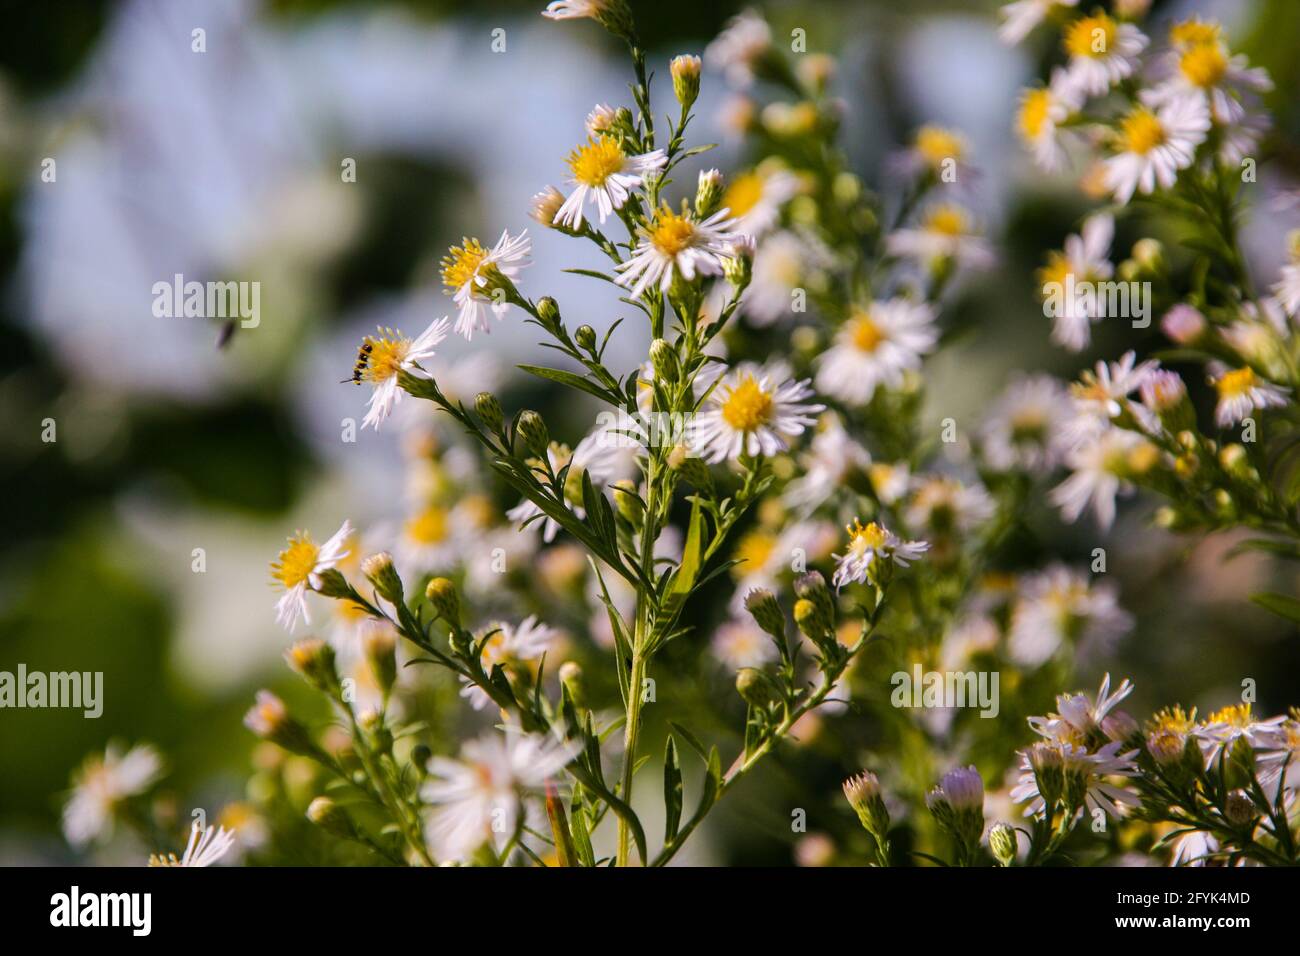 Insects on European Michaelmas daisy (Aster amellus) flowers Stock Photo